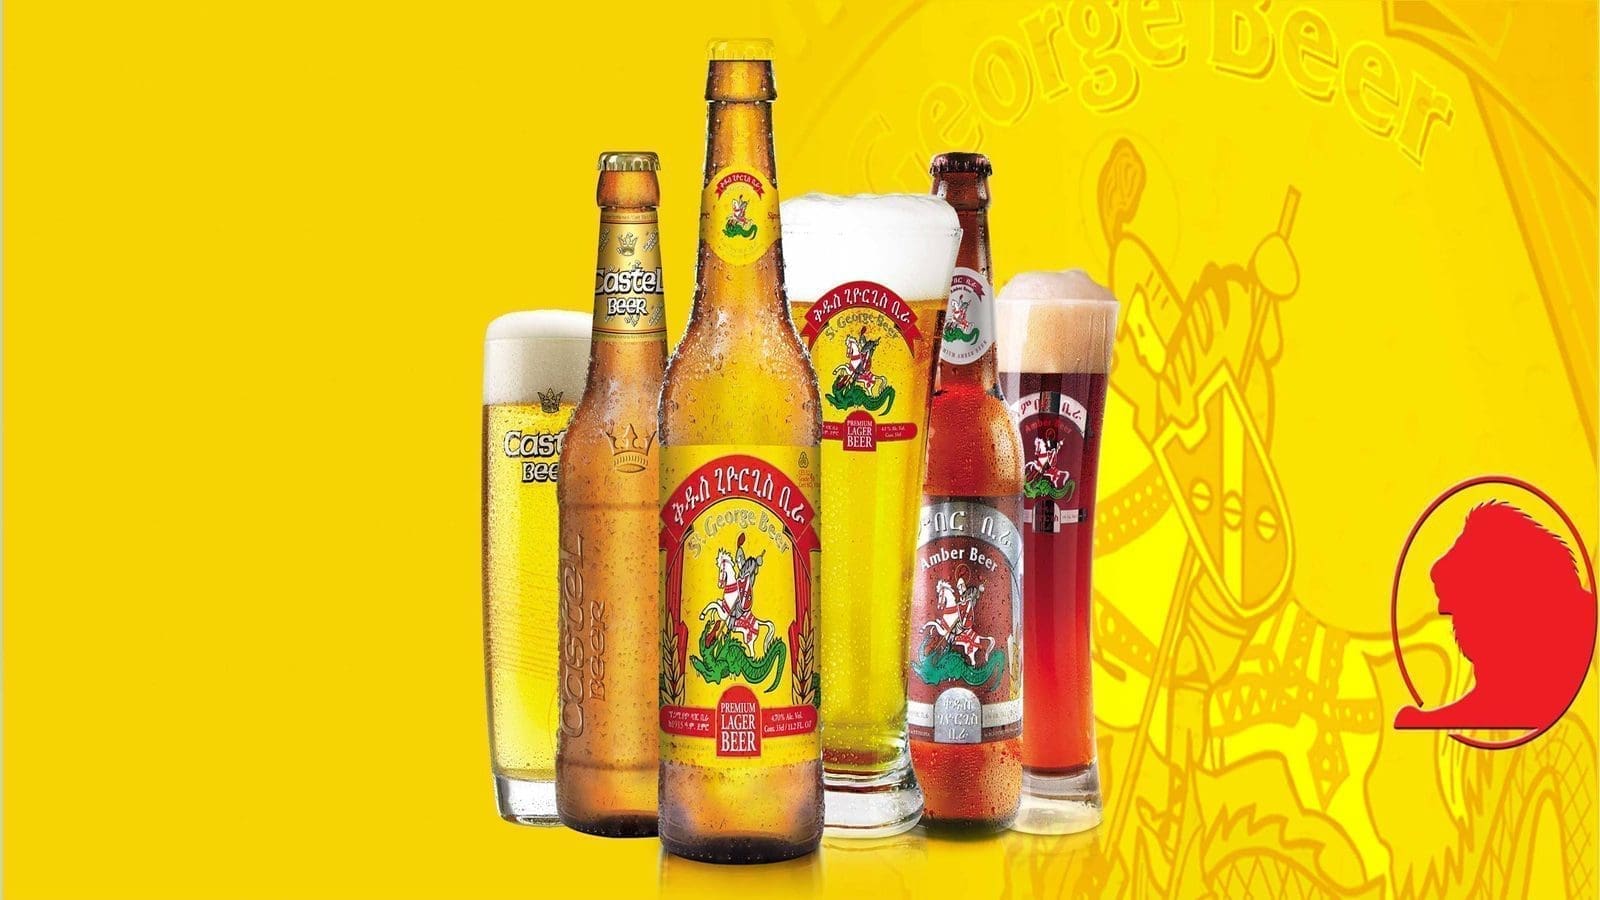 BGI Ethiopia invests US$9.3m in expanding Meto Abo Brewery